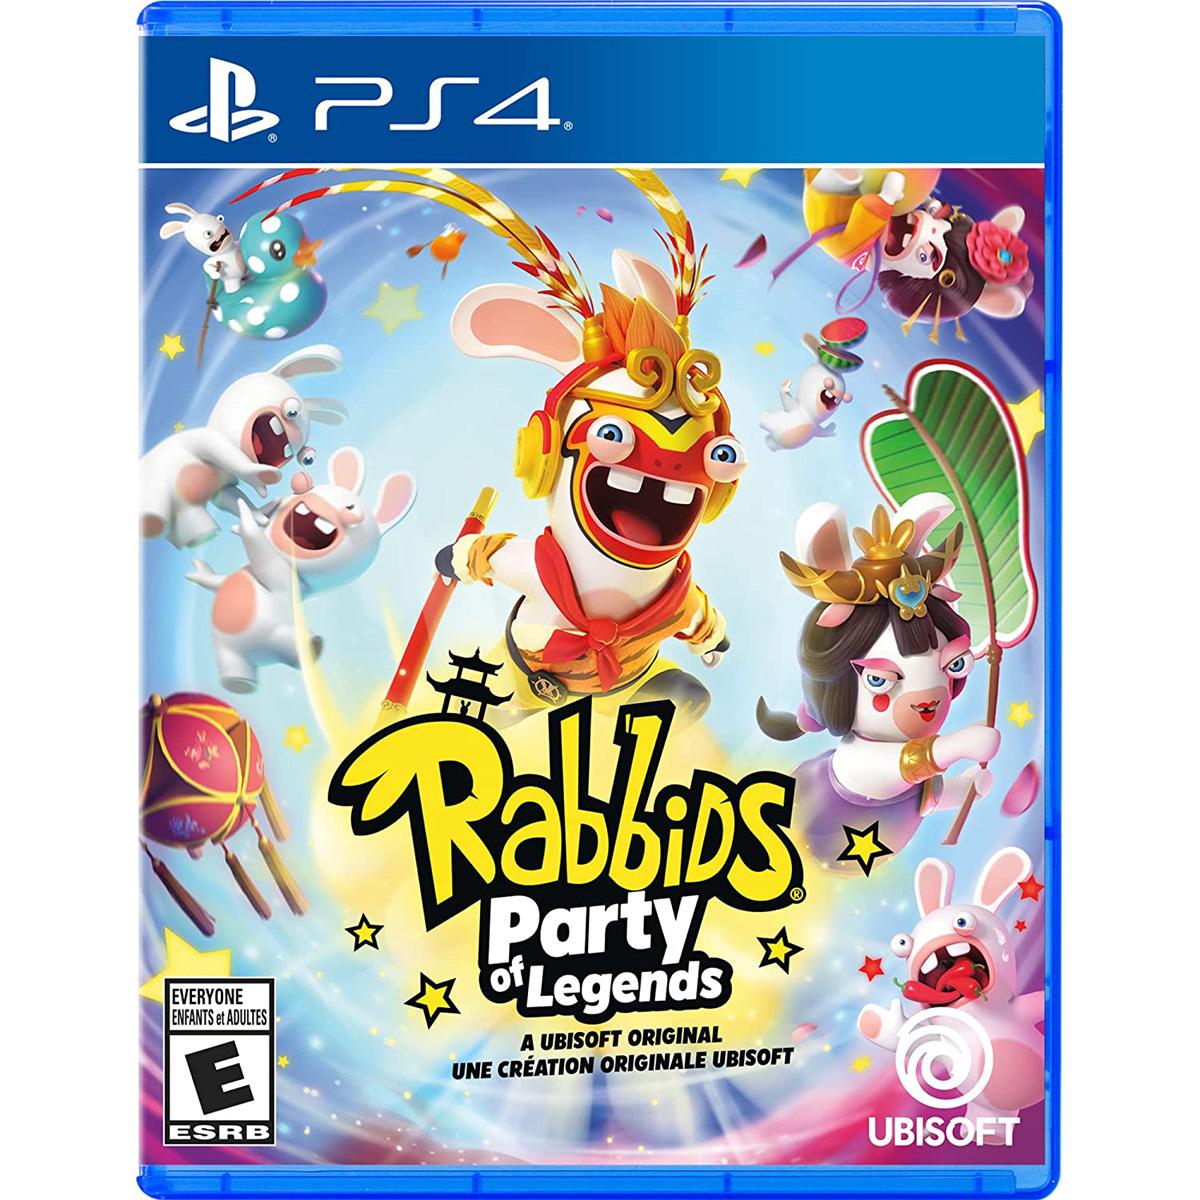 Rabbids Party of Legends Switch or PS4 or Xbox One for $14.99